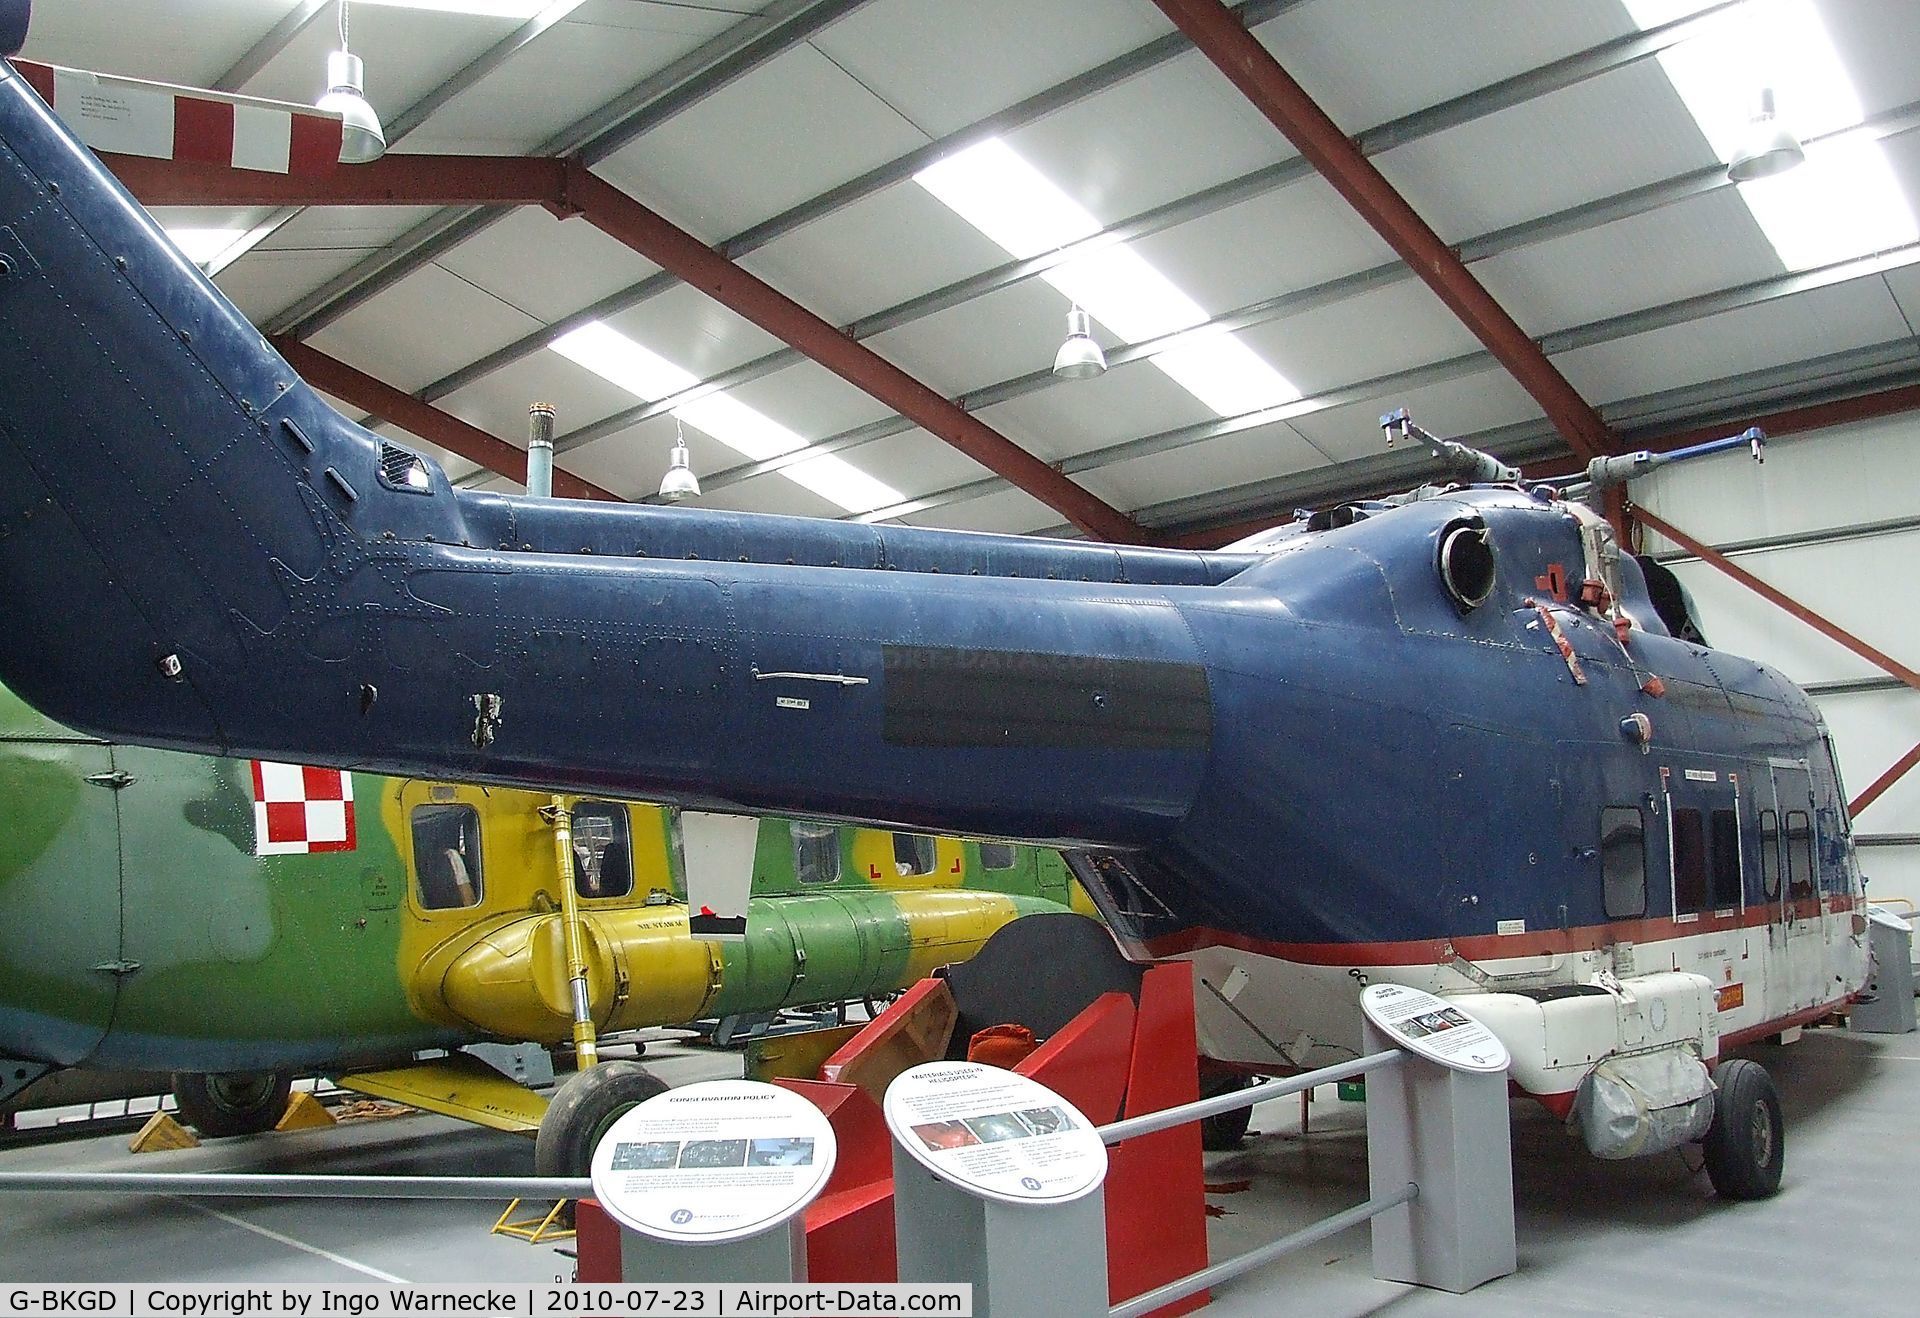 G-BKGD, 1982 Westland WG-30-100 C/N 002, Westland 30-100 at the Helicopter Museum, Weston-super-Mare